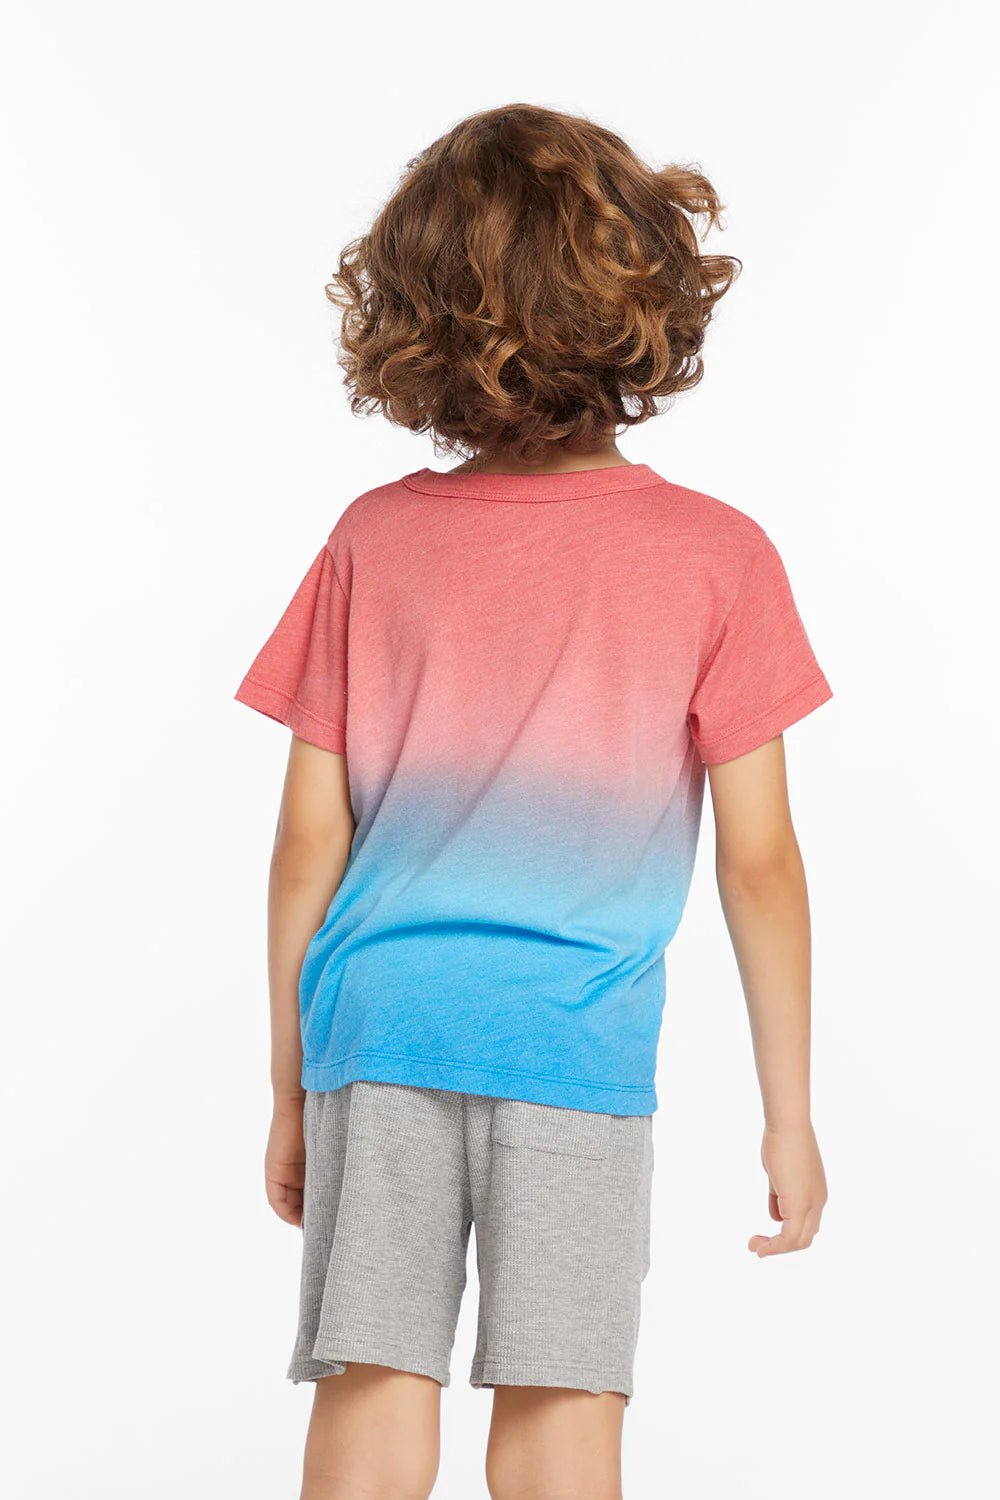 Chaser Kids ACDC Live on Stage Tee in Red Blue Dip Dye - Estilo Boutique